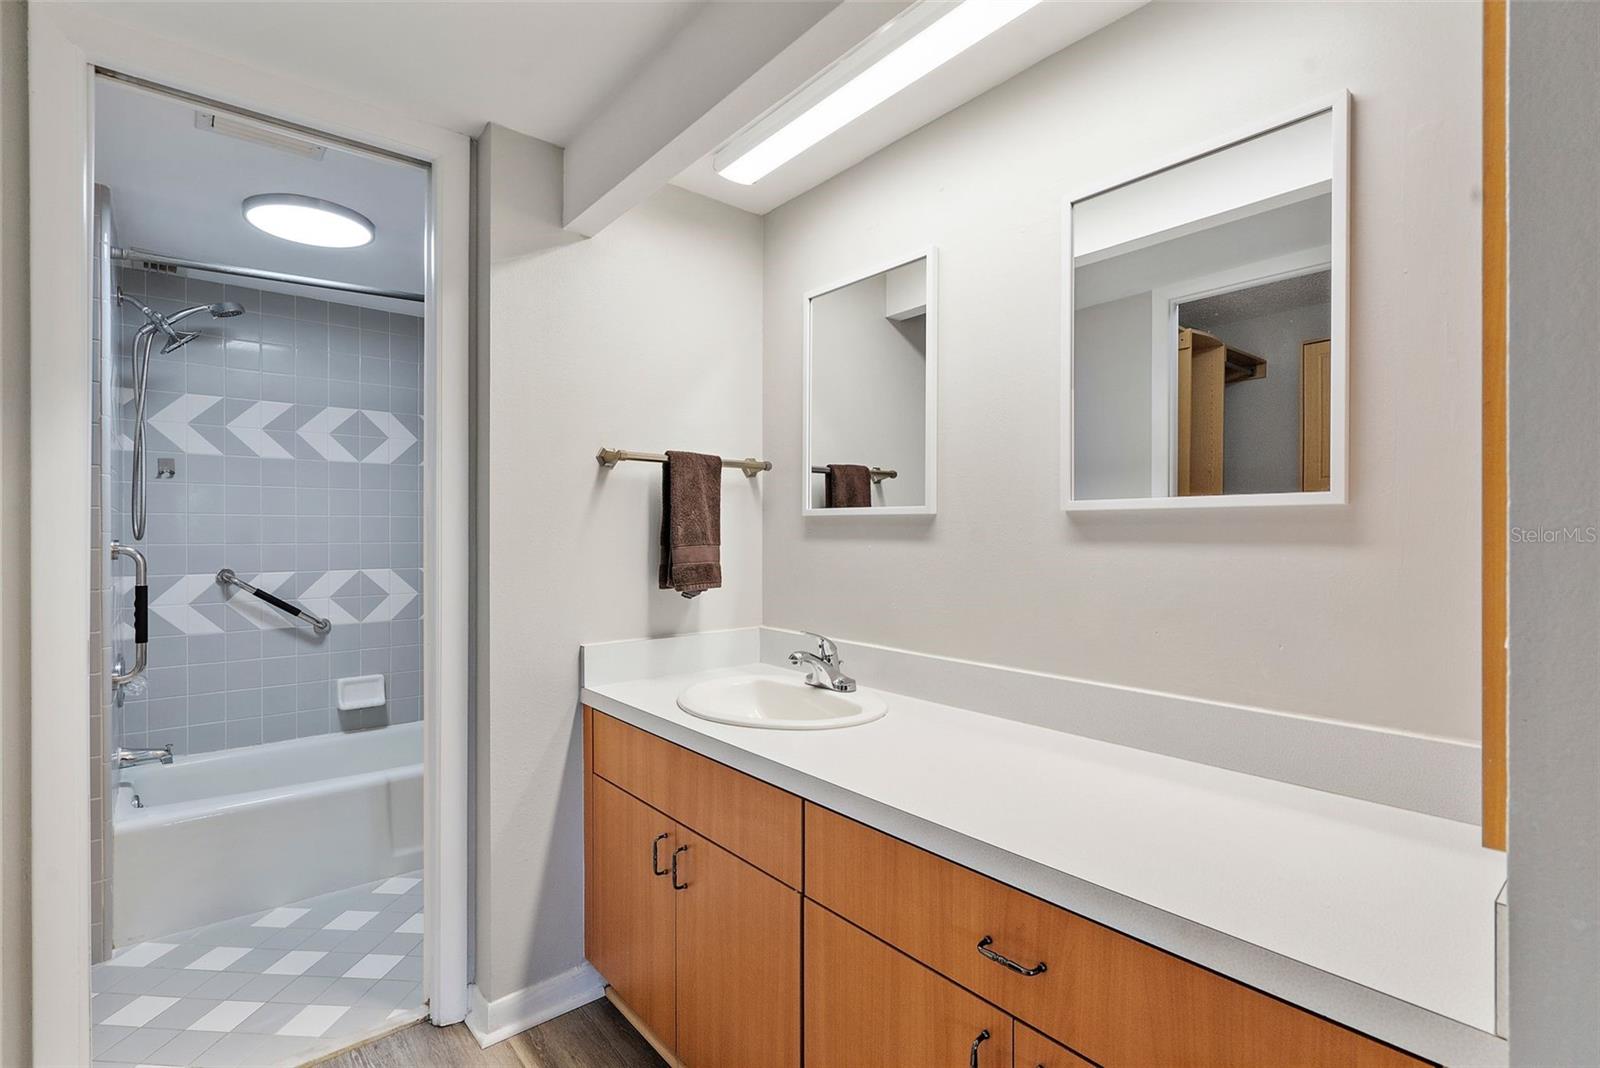 The bedroom boasts a walk-in closet and ensuite bath.